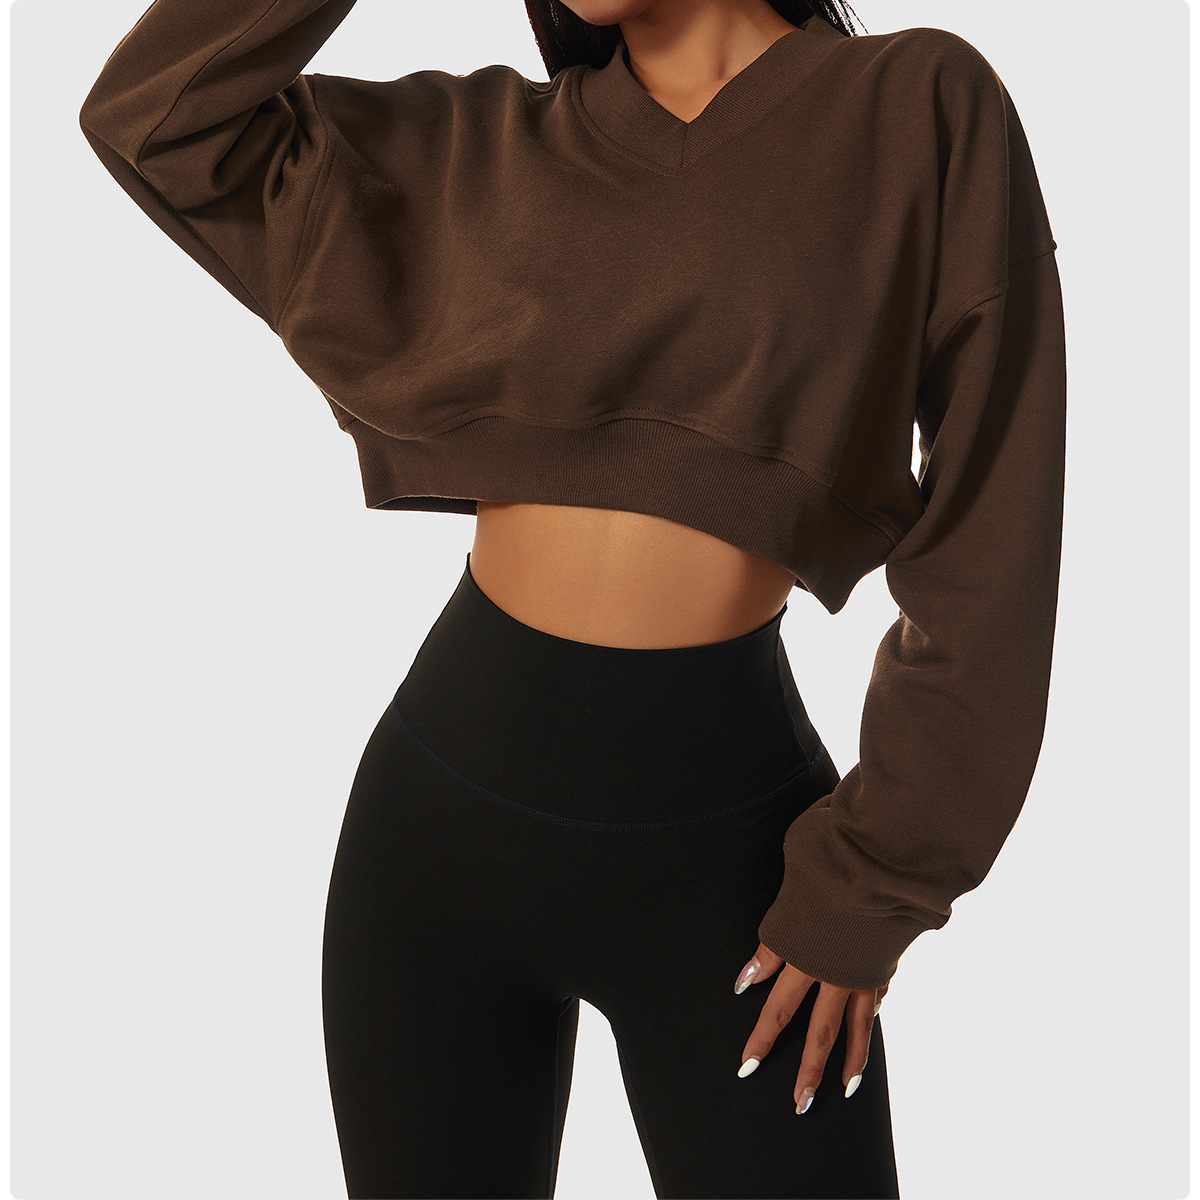 LL Women's Yoga Long Sleeve Shirt Crop Top Solid Color Loose Sports Fitness V Neck Jogging Sportswear Breathable 